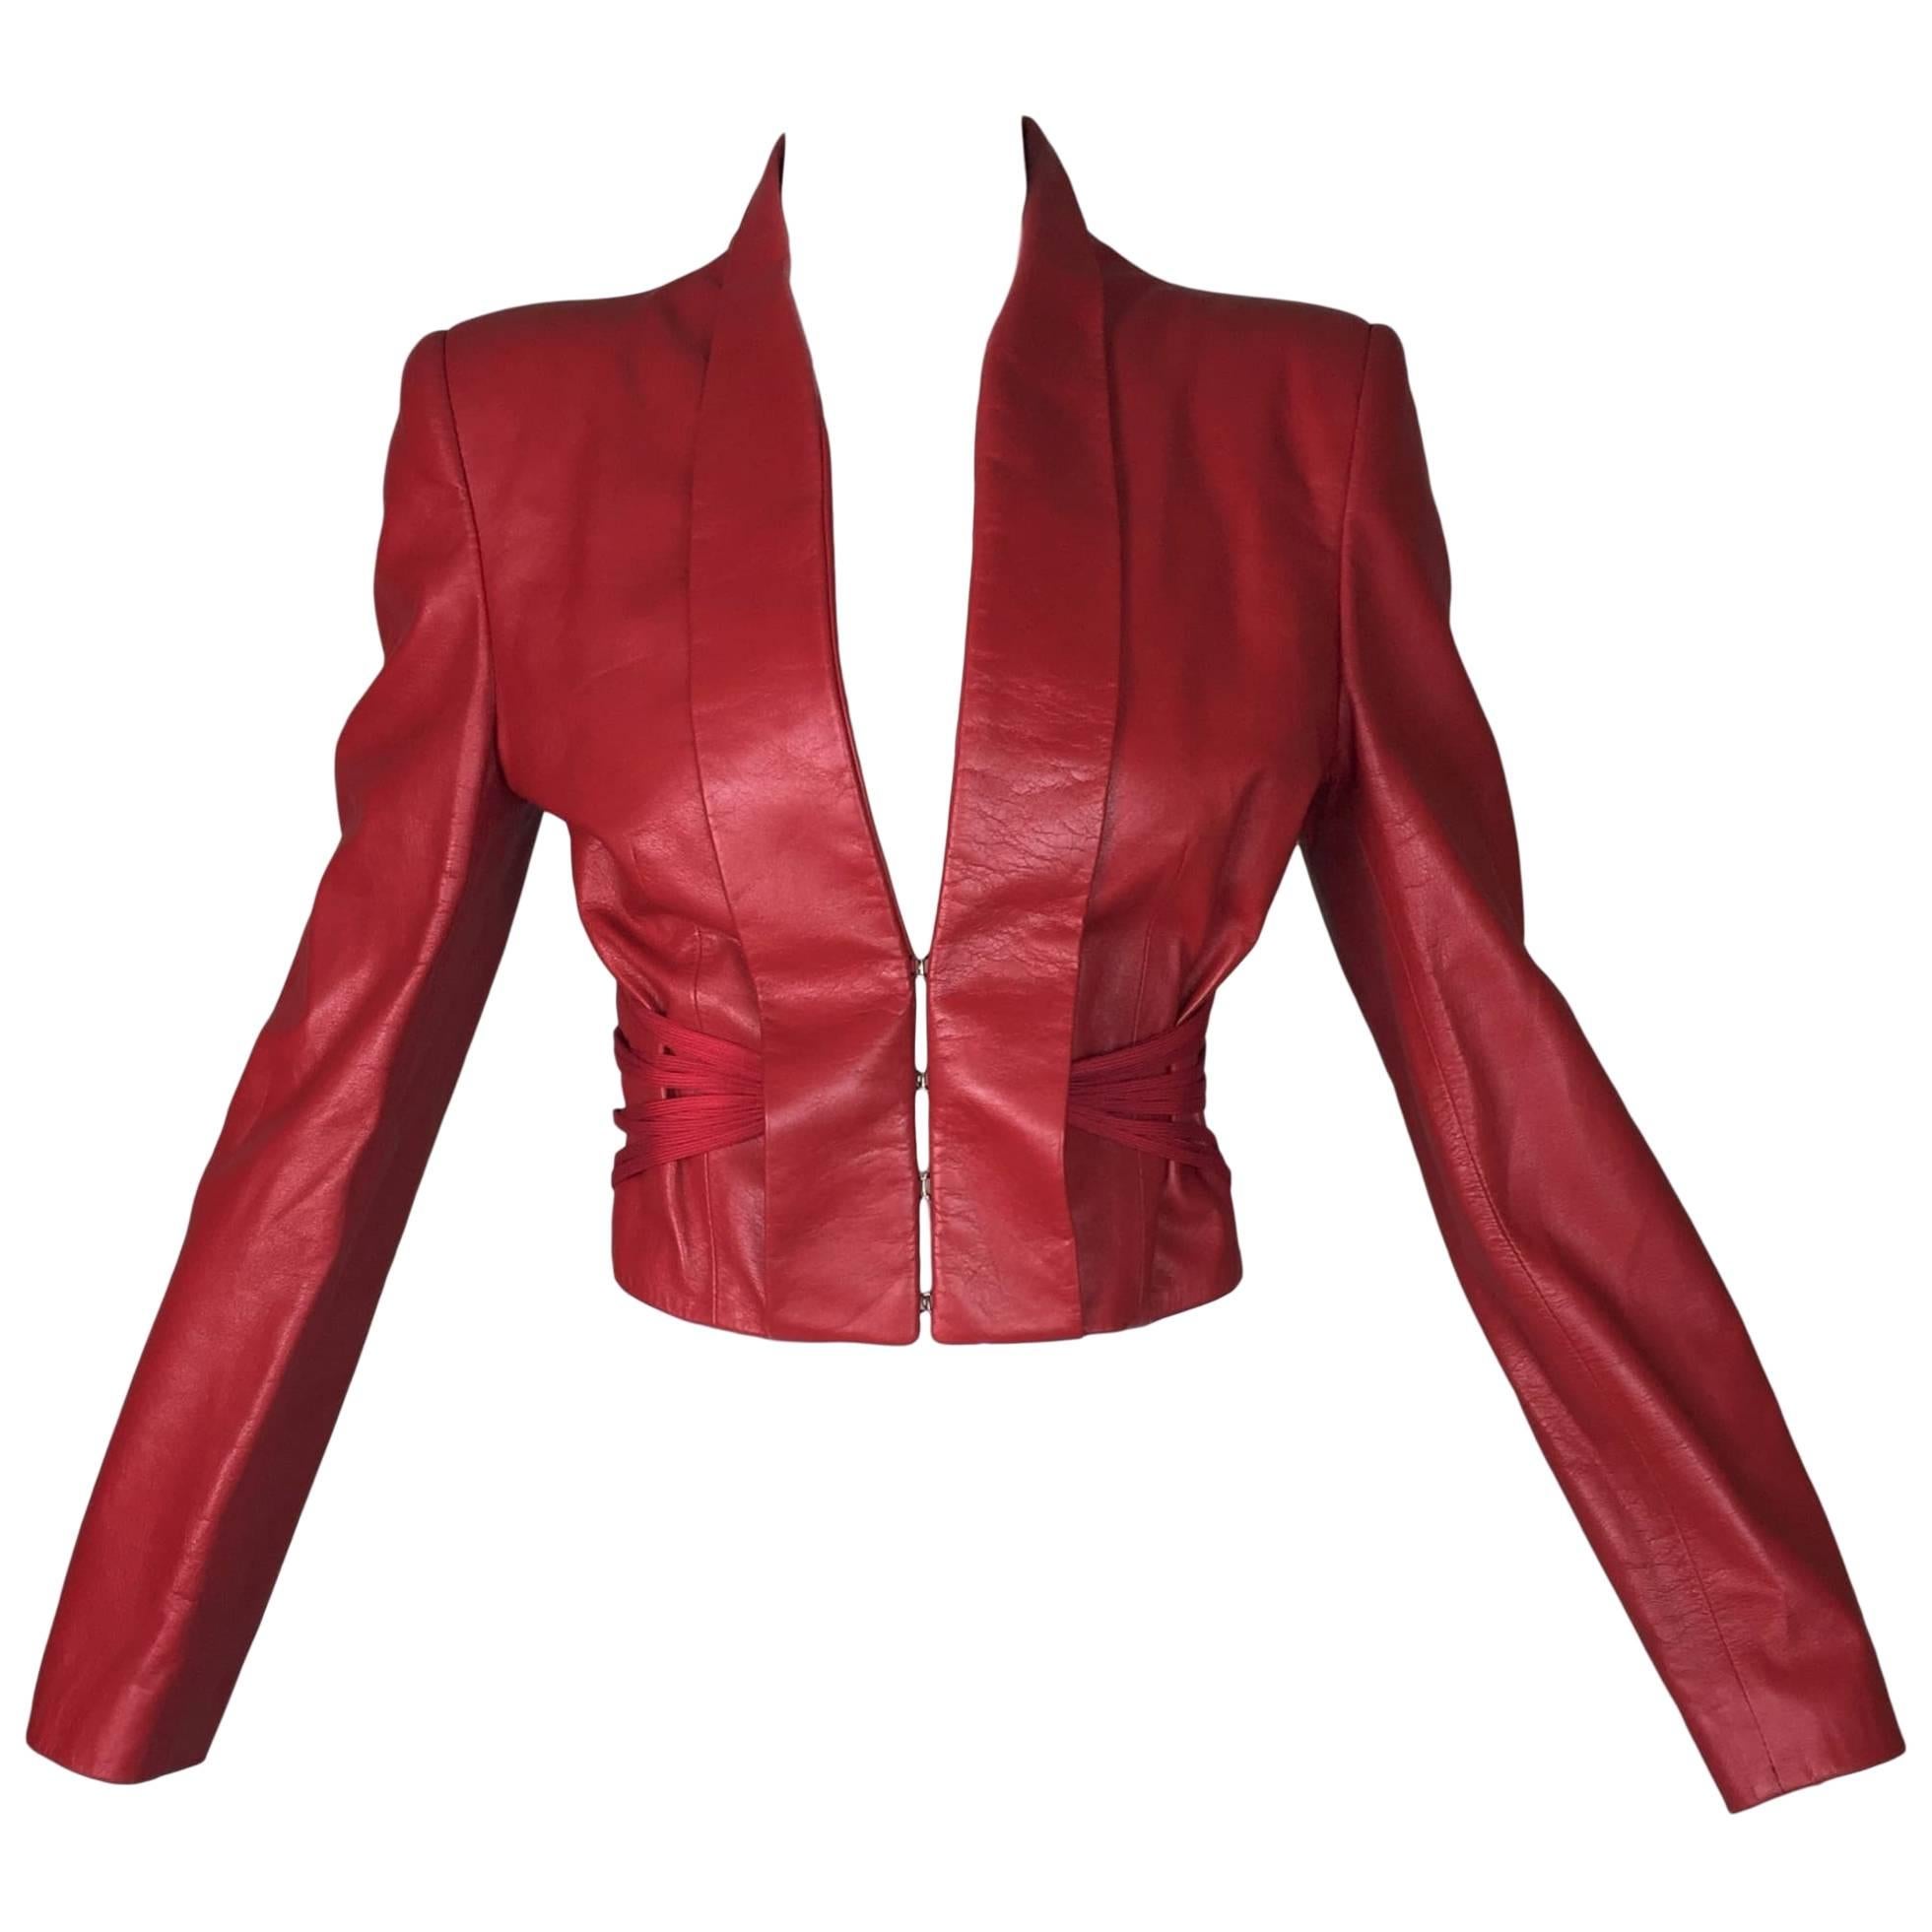 Alexander McQueen Red Leather Cropped Corset Jacket, S/S 2002